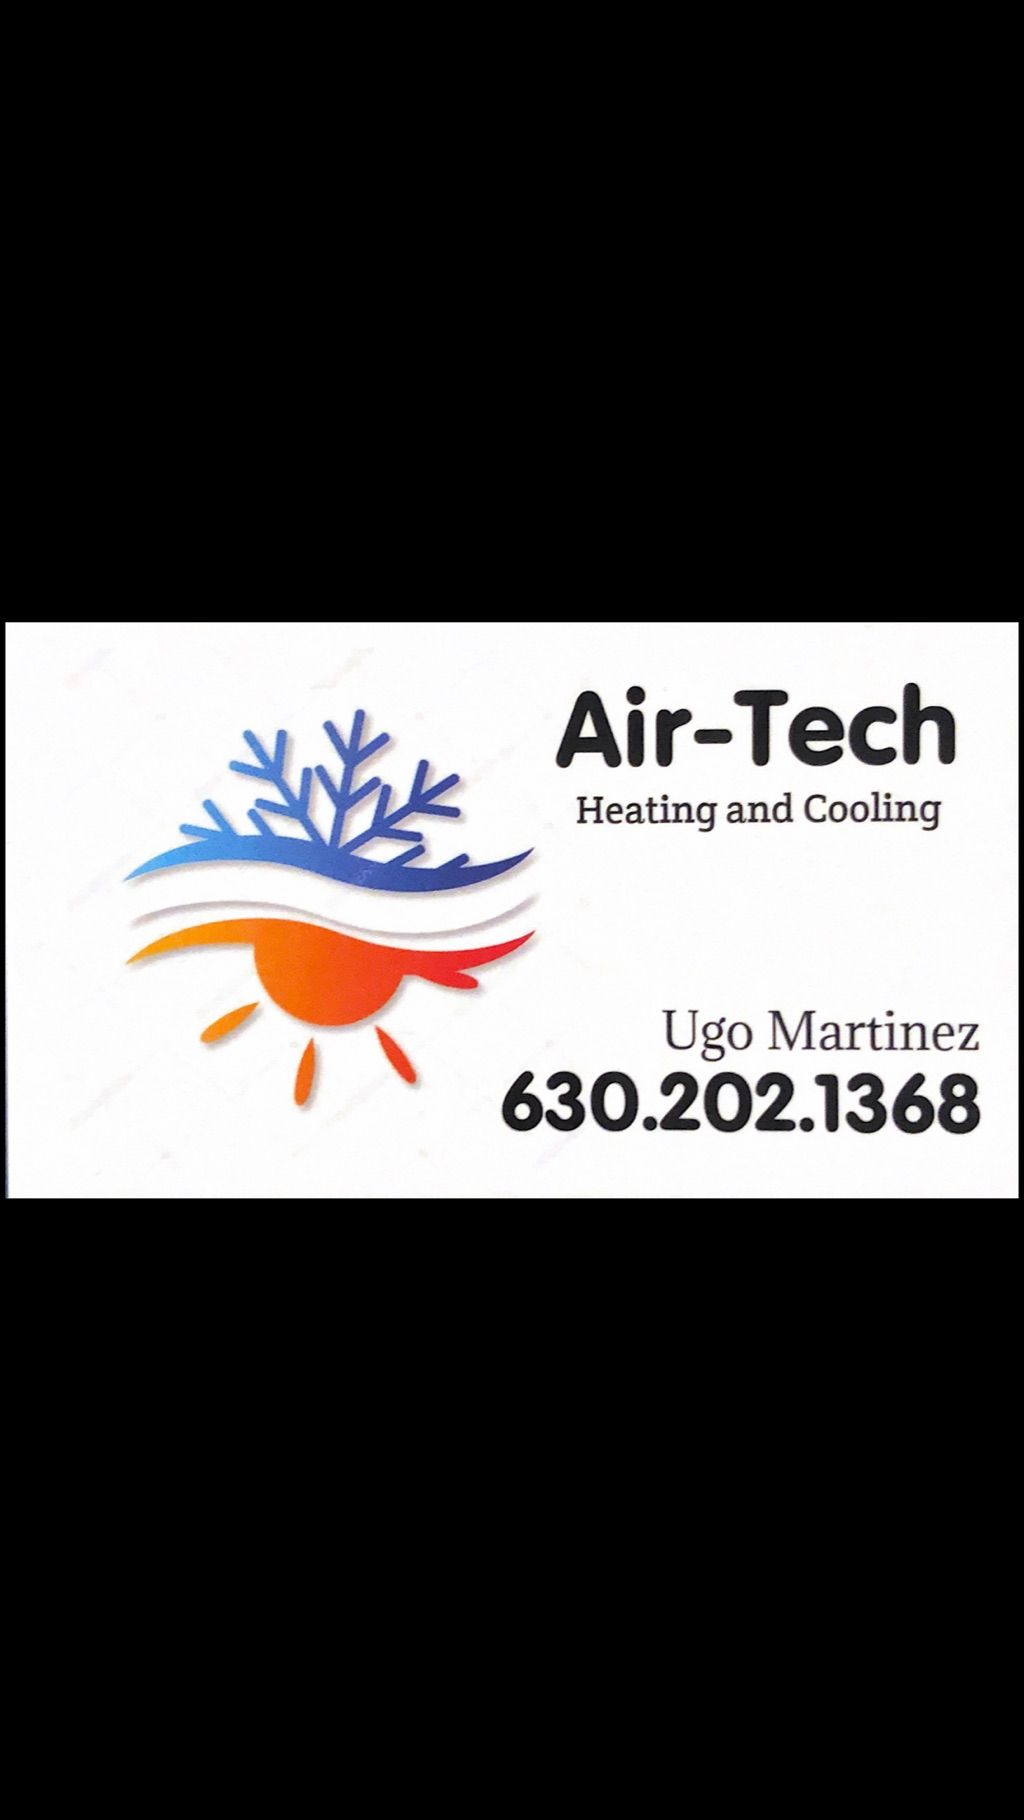 Air-Tech Heating and Cooling